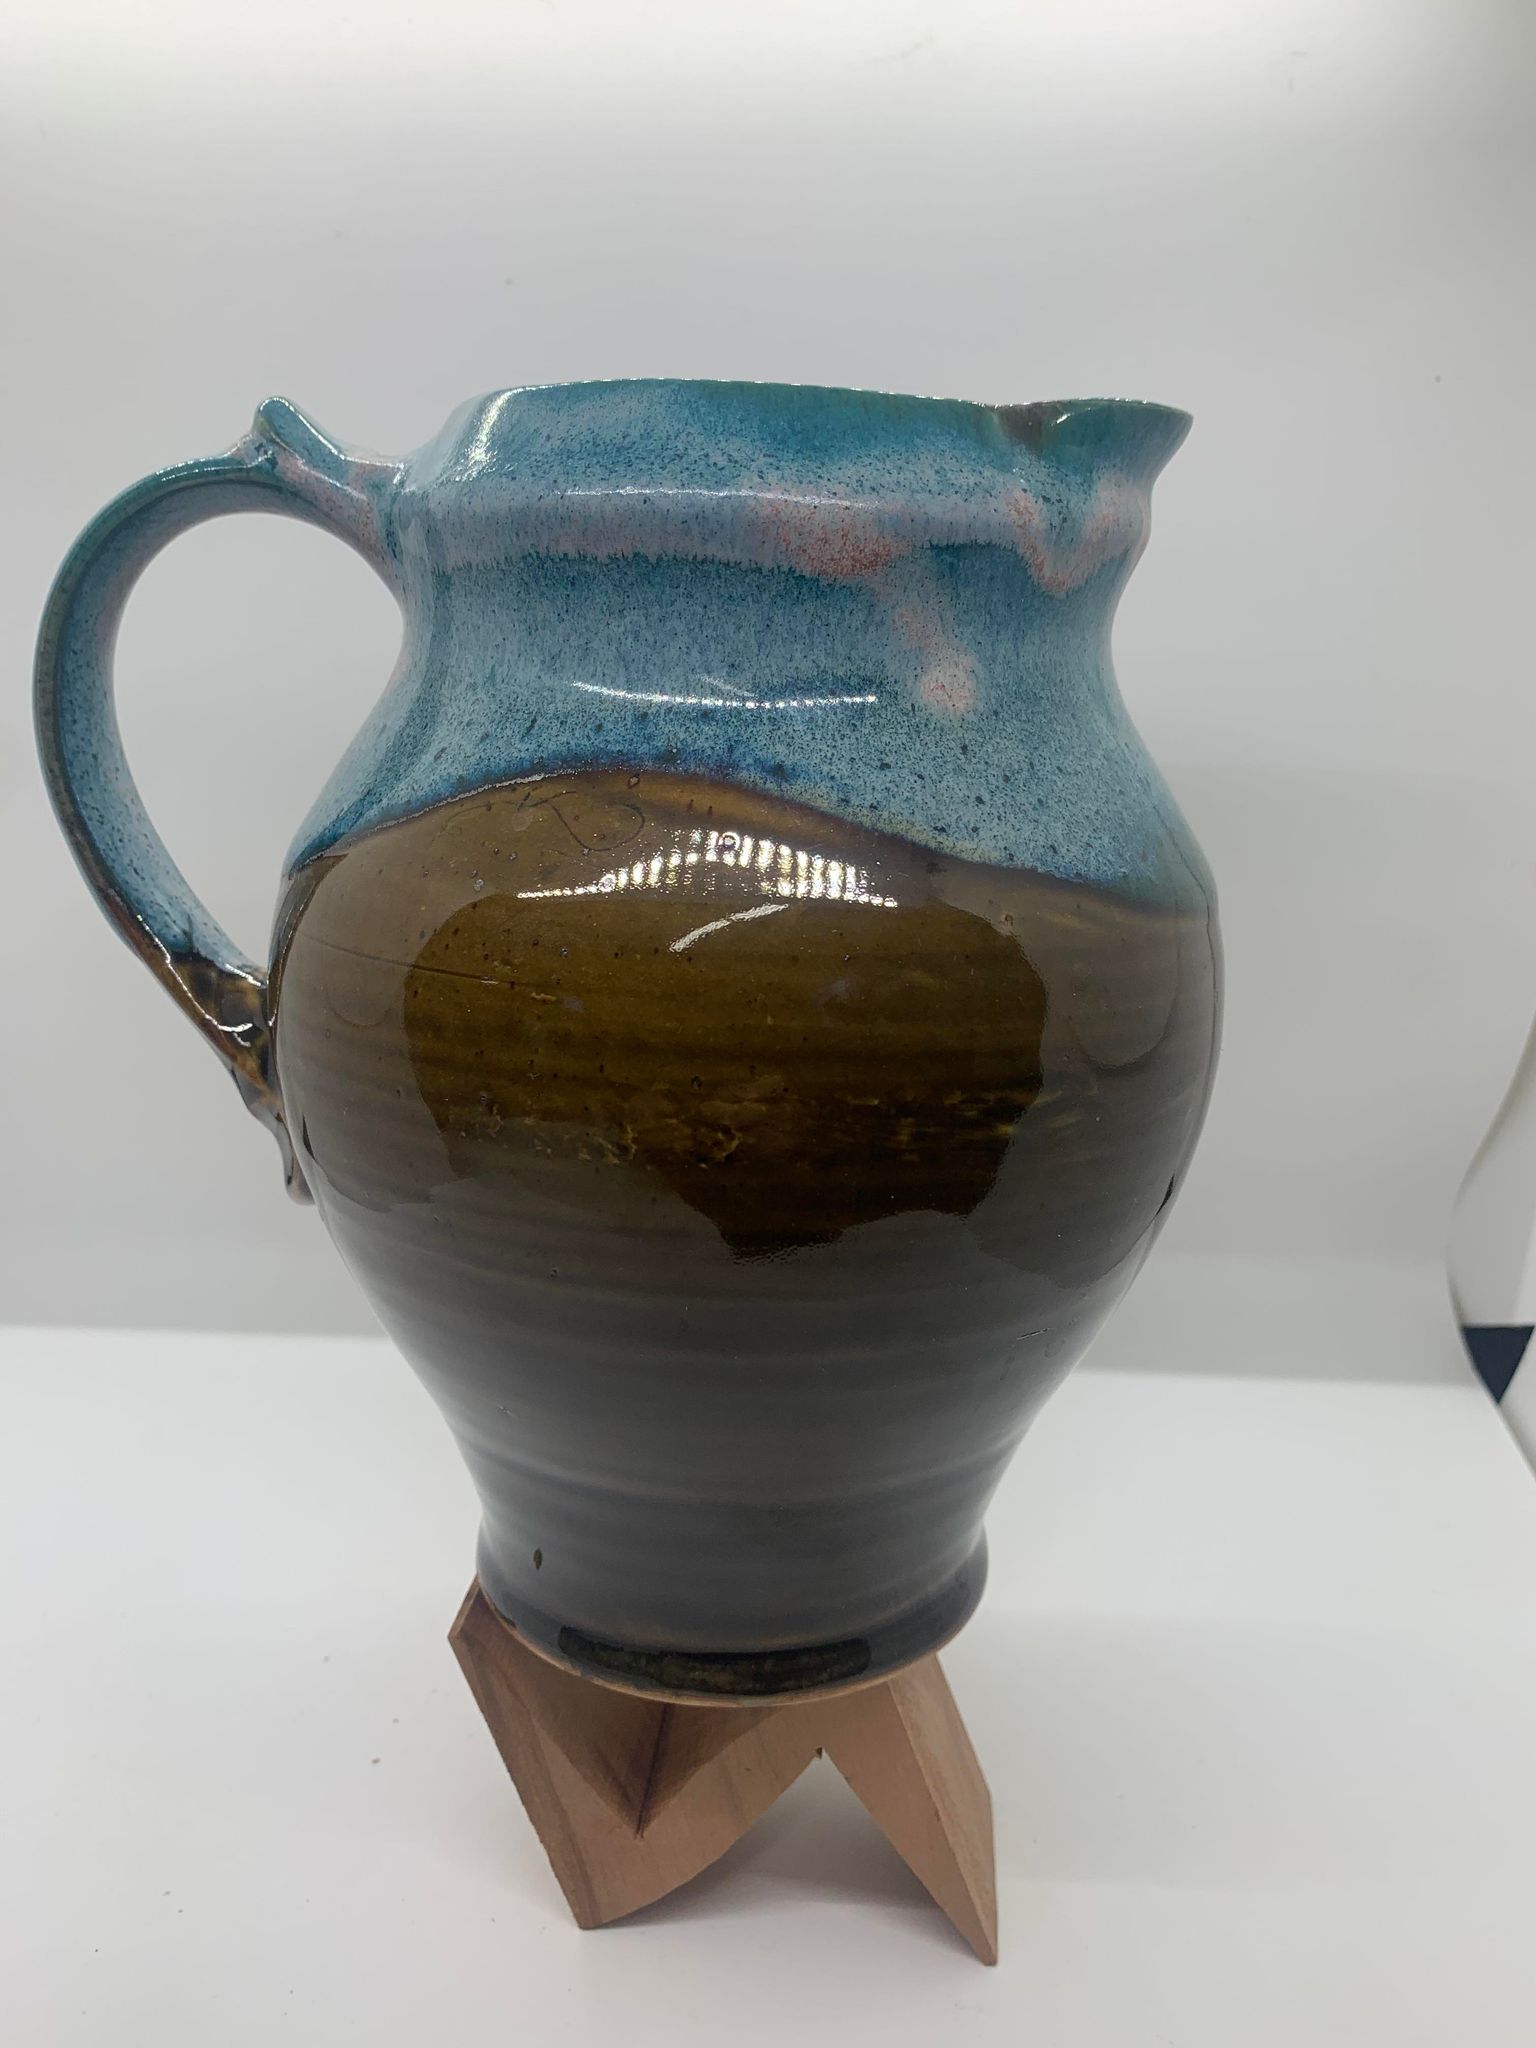 A blue and brown Perry Munn Pottery Large Pitcher on a wooden stand.